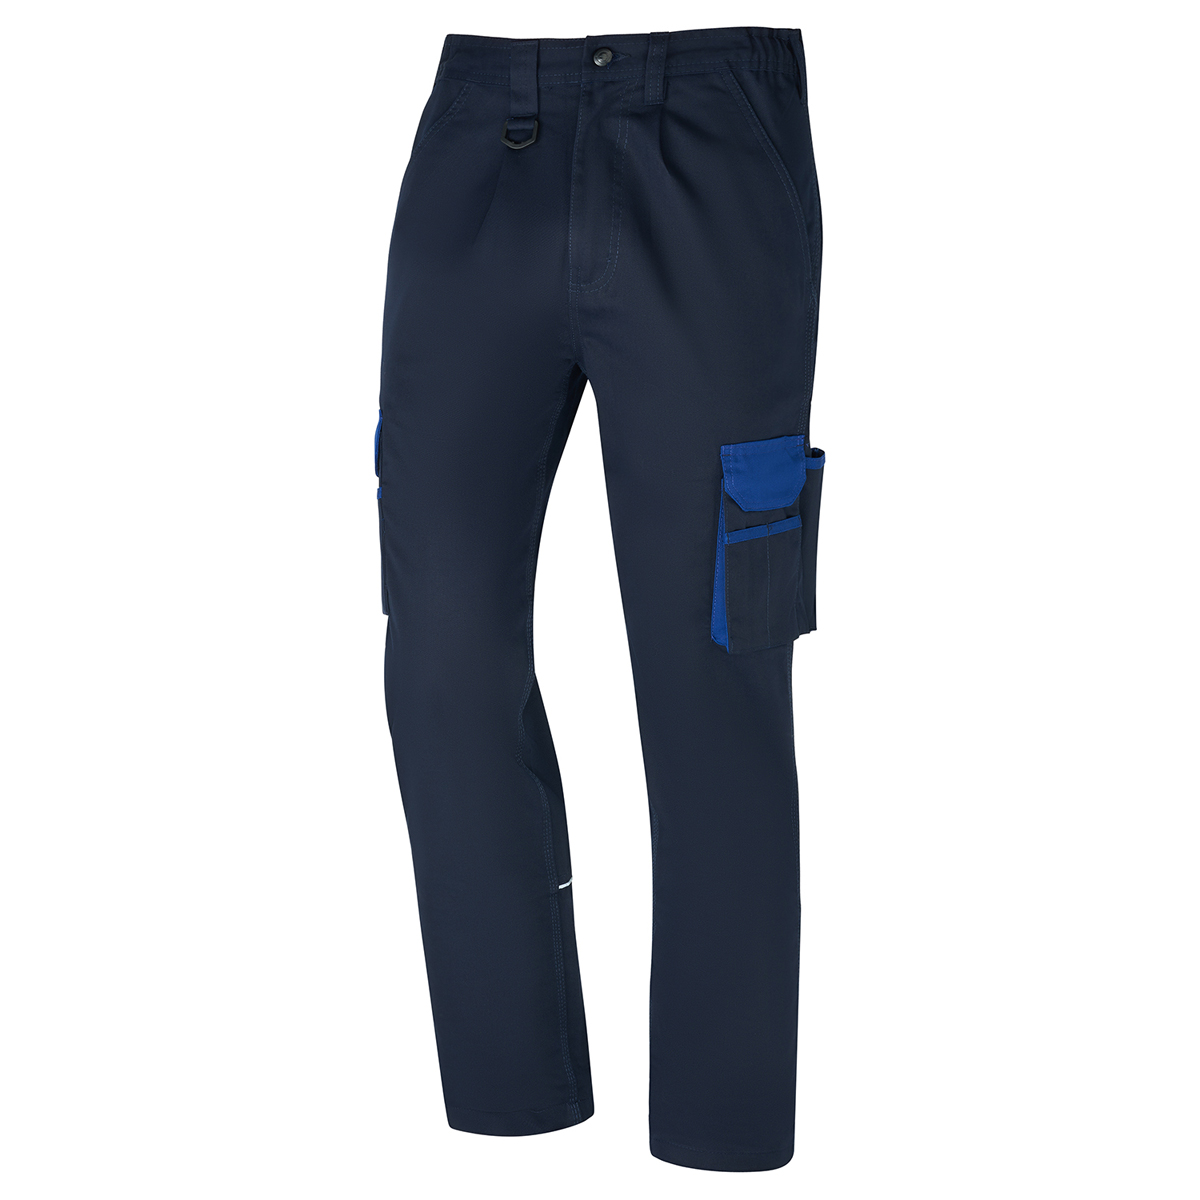 Silverswift two tone combat trouser - 34t - navy / royal